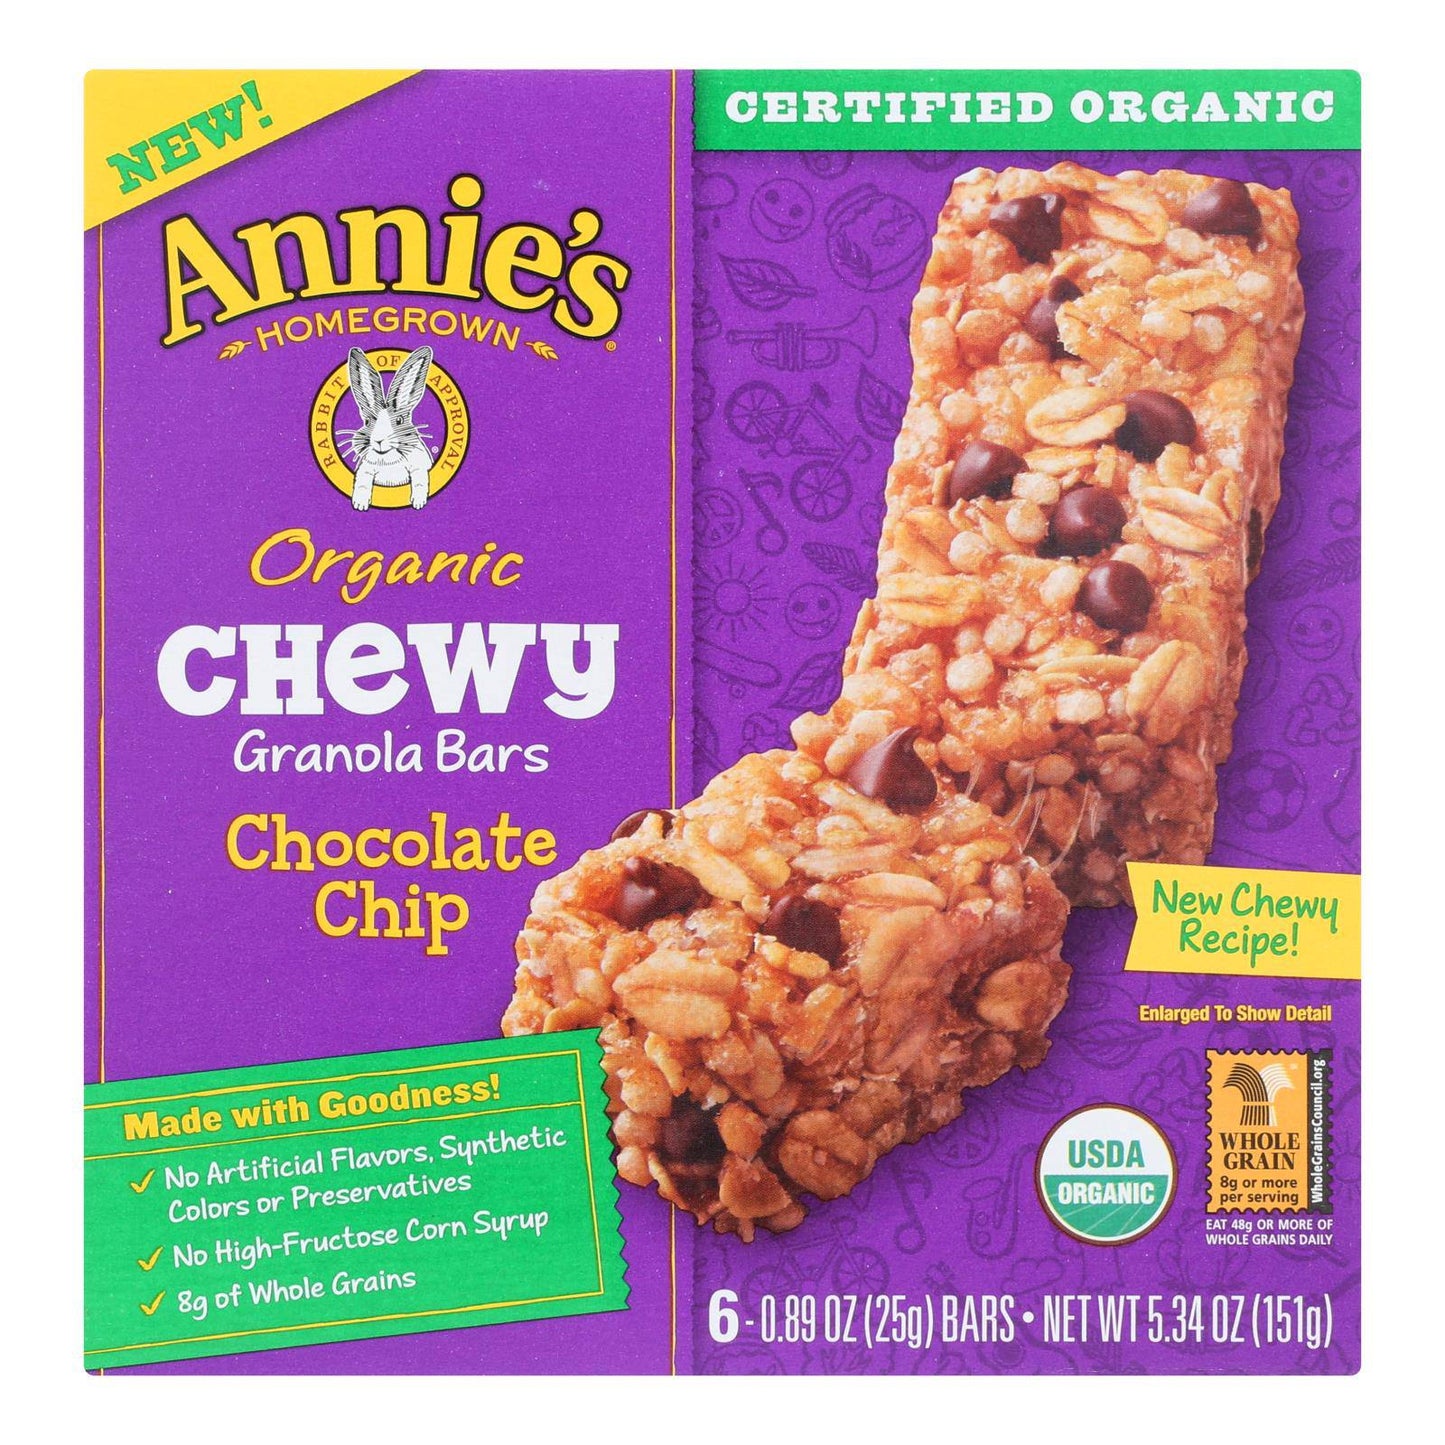 Annie's Homegrown Organic Chewy Granola Bars Chocolate Chip - Case Of 12 - 5.34 Oz. | OnlyNaturals.us